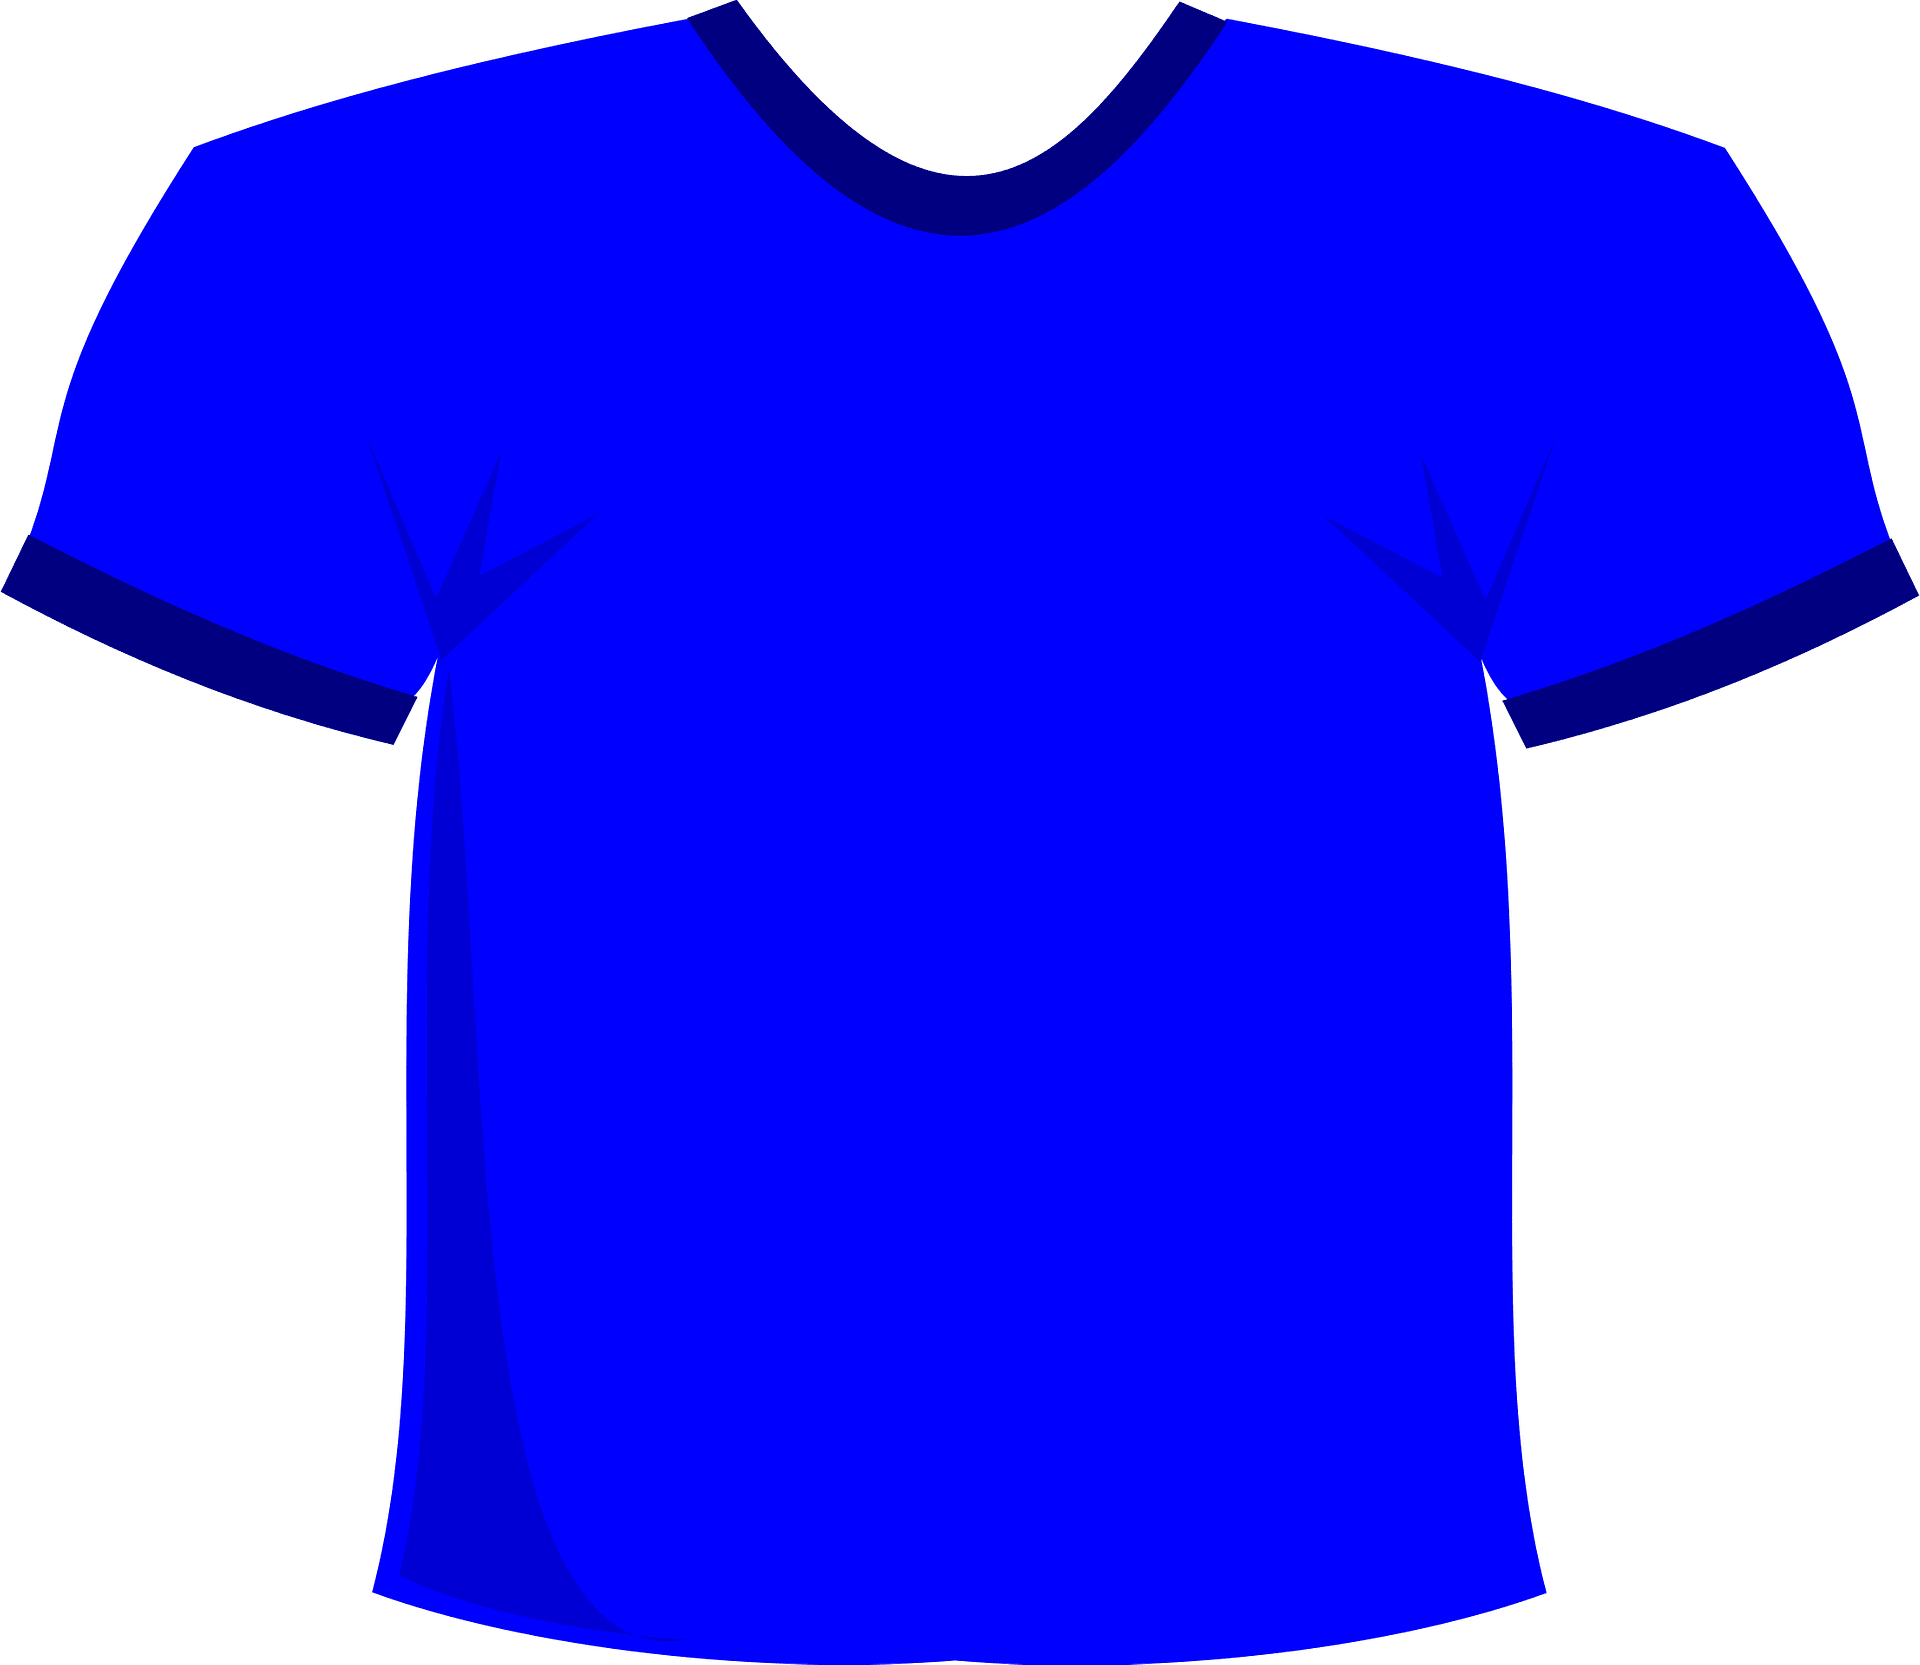 Free T Shirt Clip Art Pictures - Clipart Library - Clip Art Library